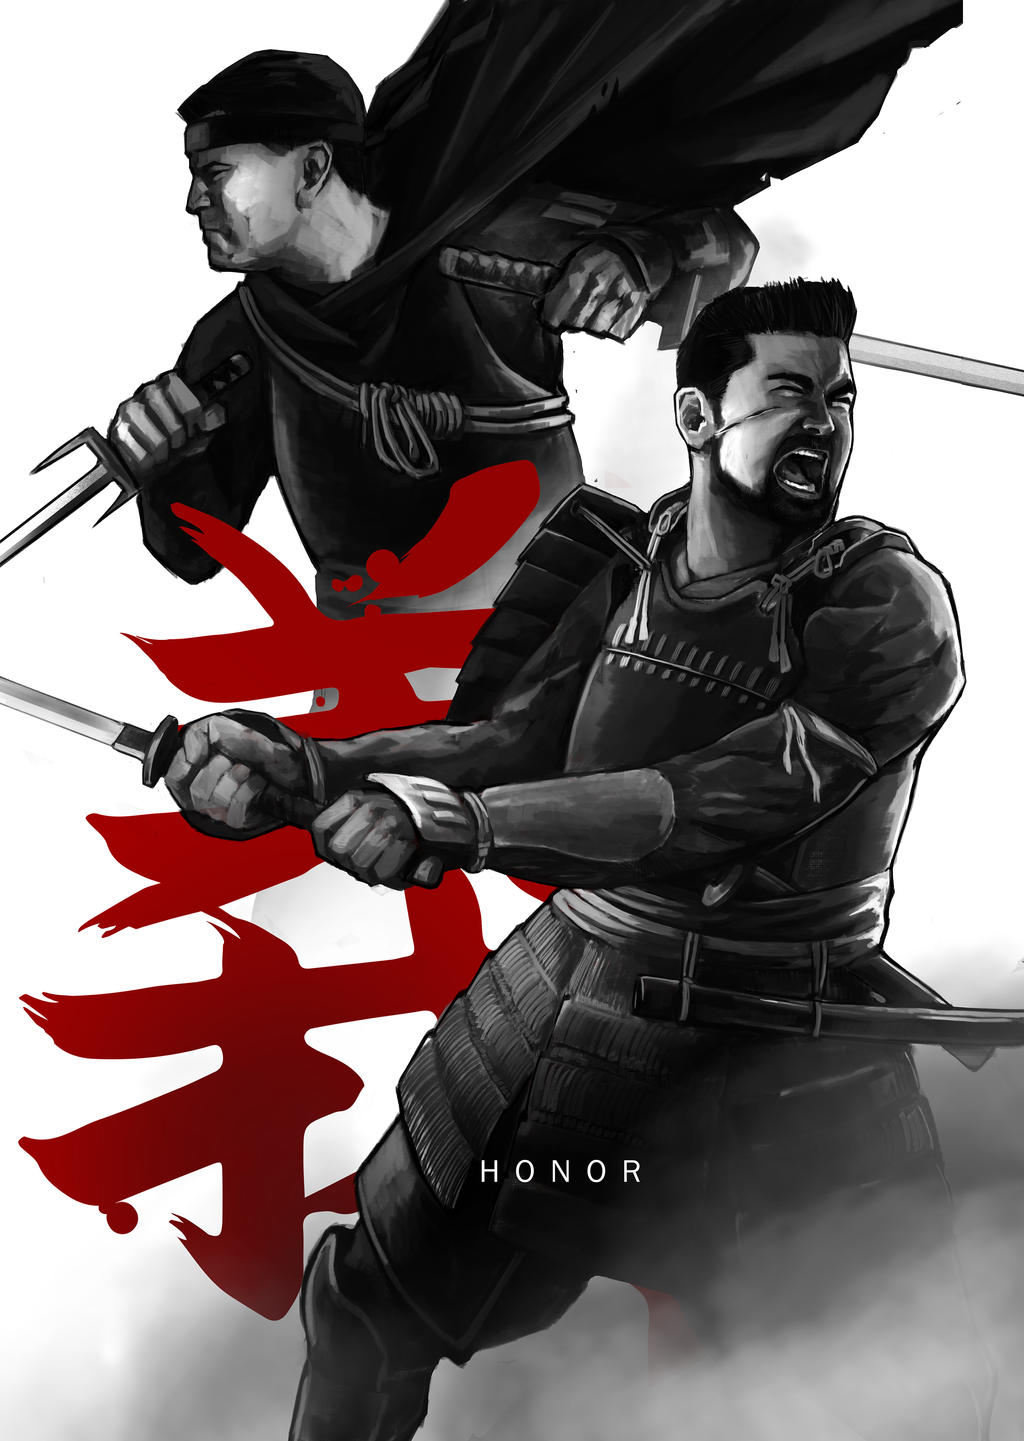 Angry Joe Ghost of Tsushima Poster by gonzo1the1first on DeviantArt